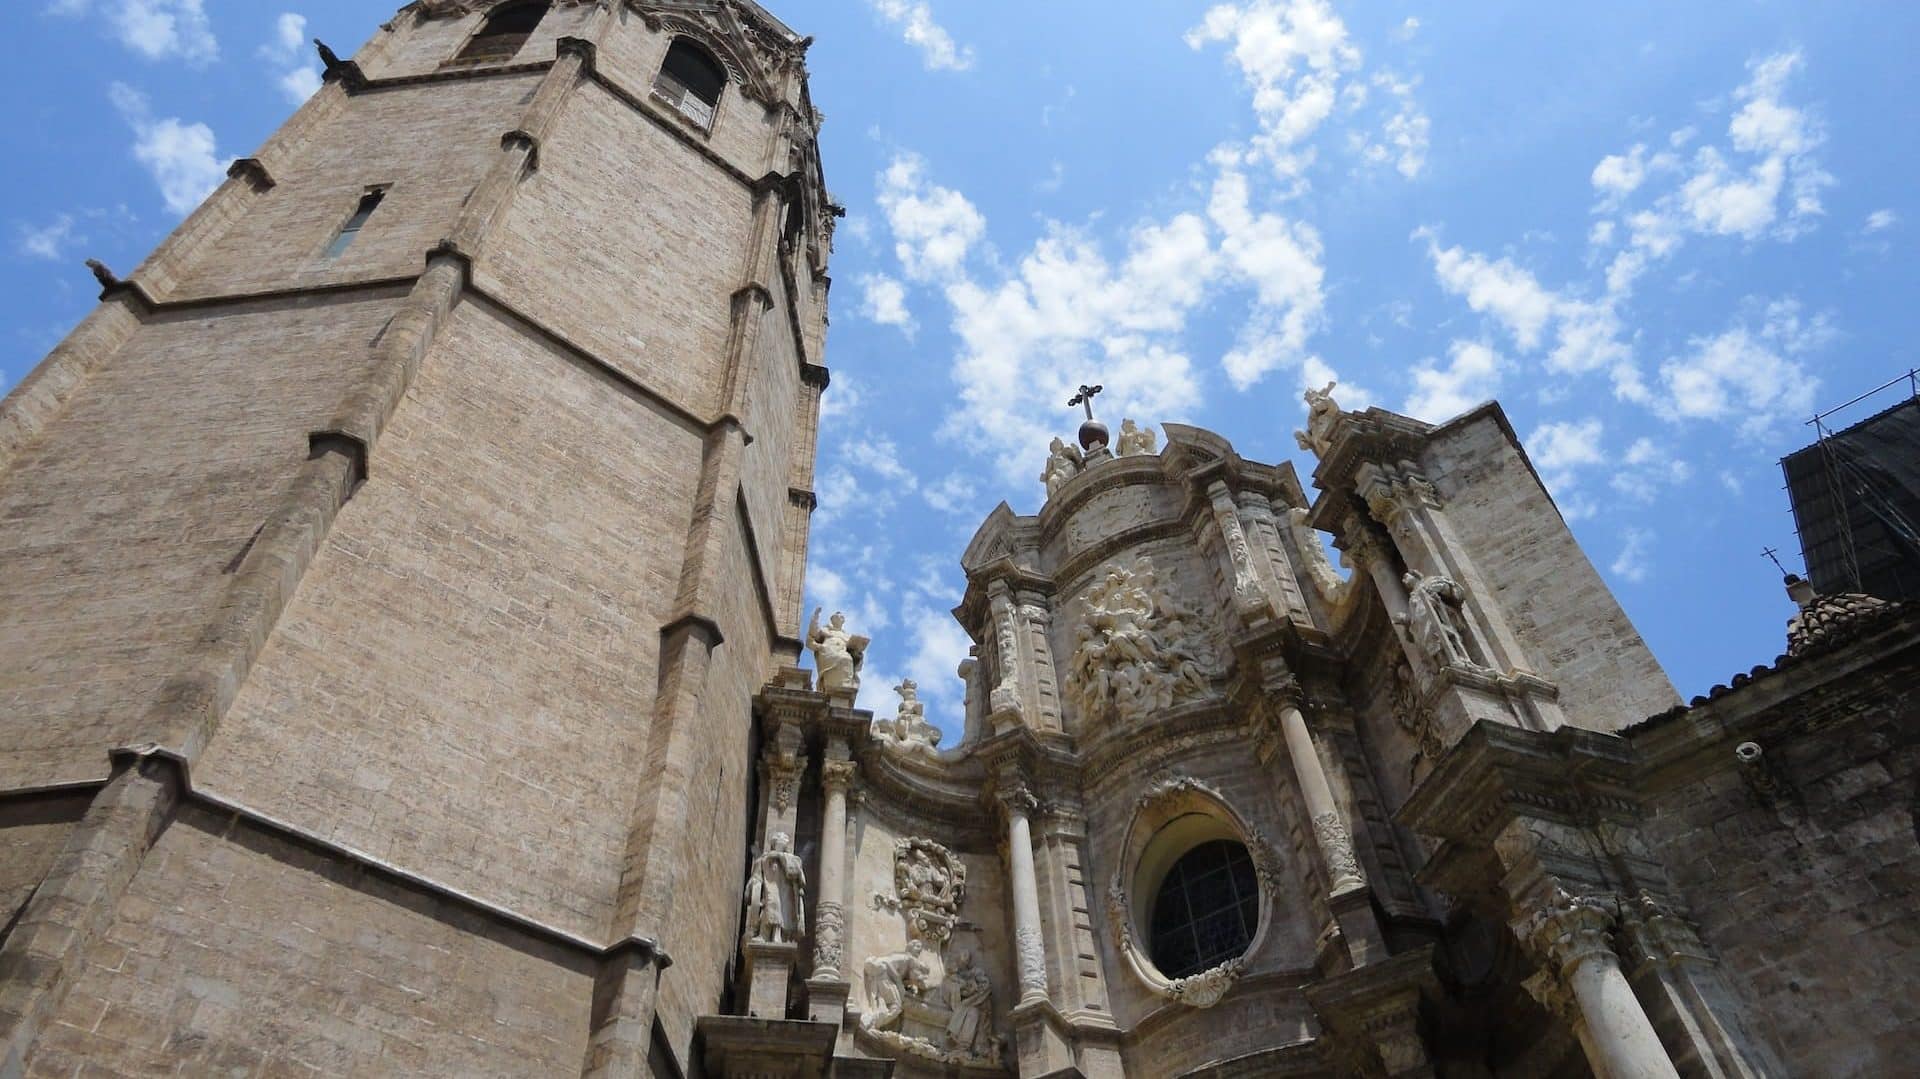 Attractions such as the Cathedral make Ciutat Vella one of the best areas to stay in Valencia